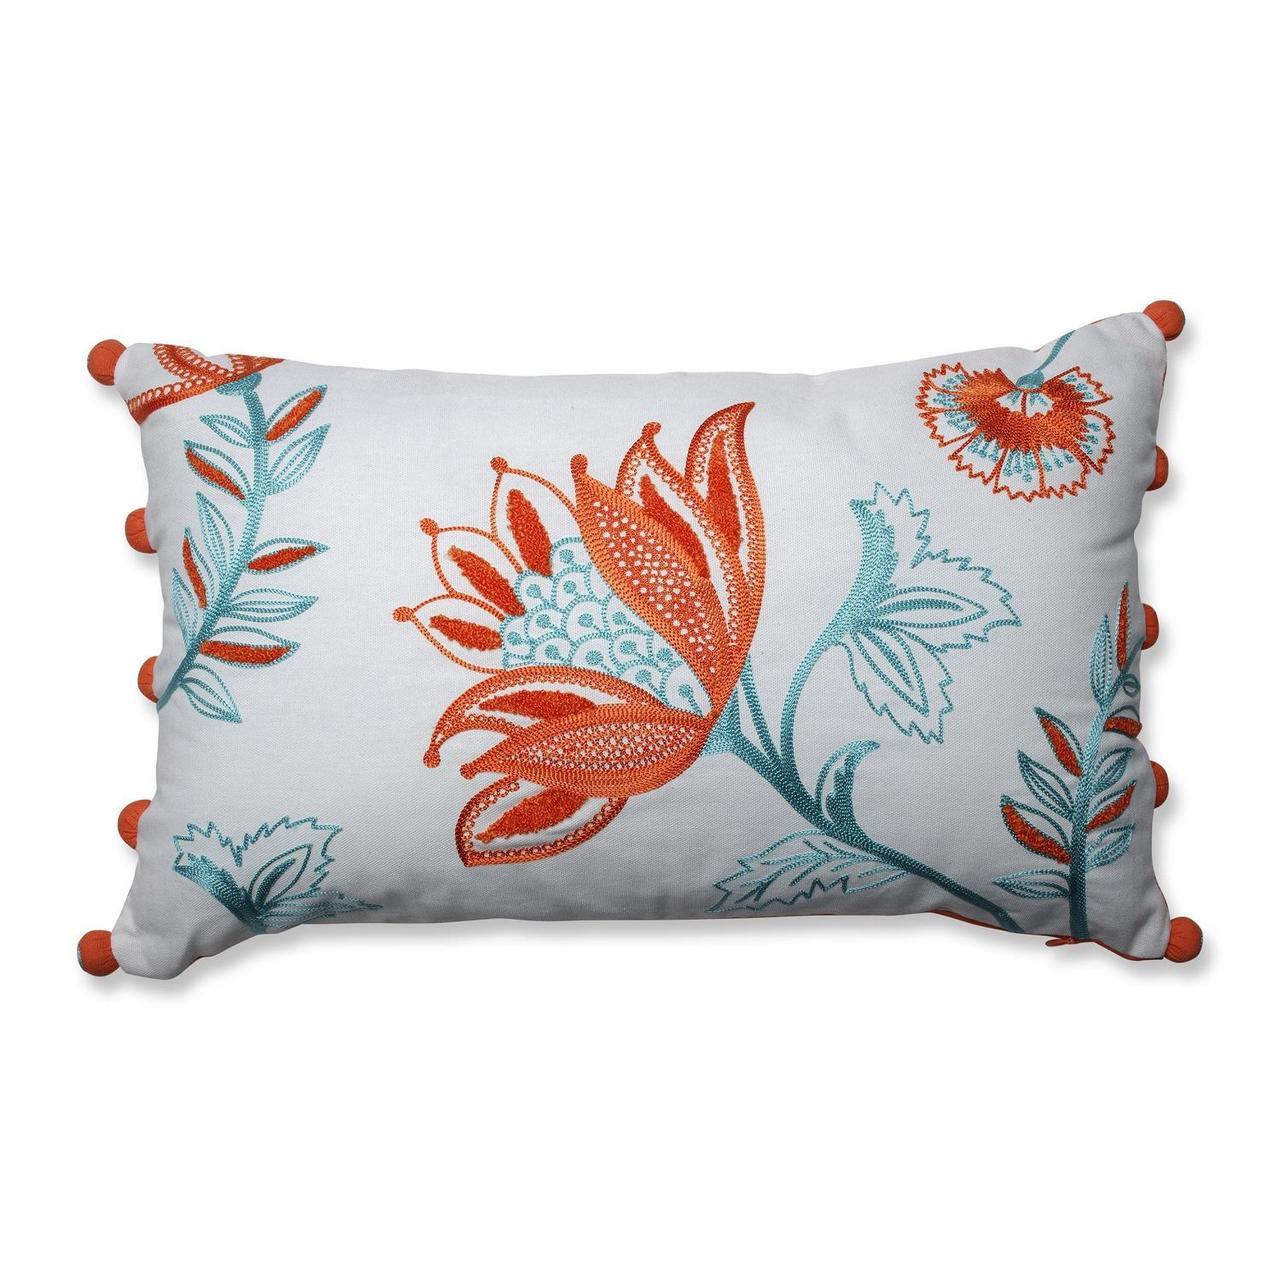 Coral Themed Throw Pillow